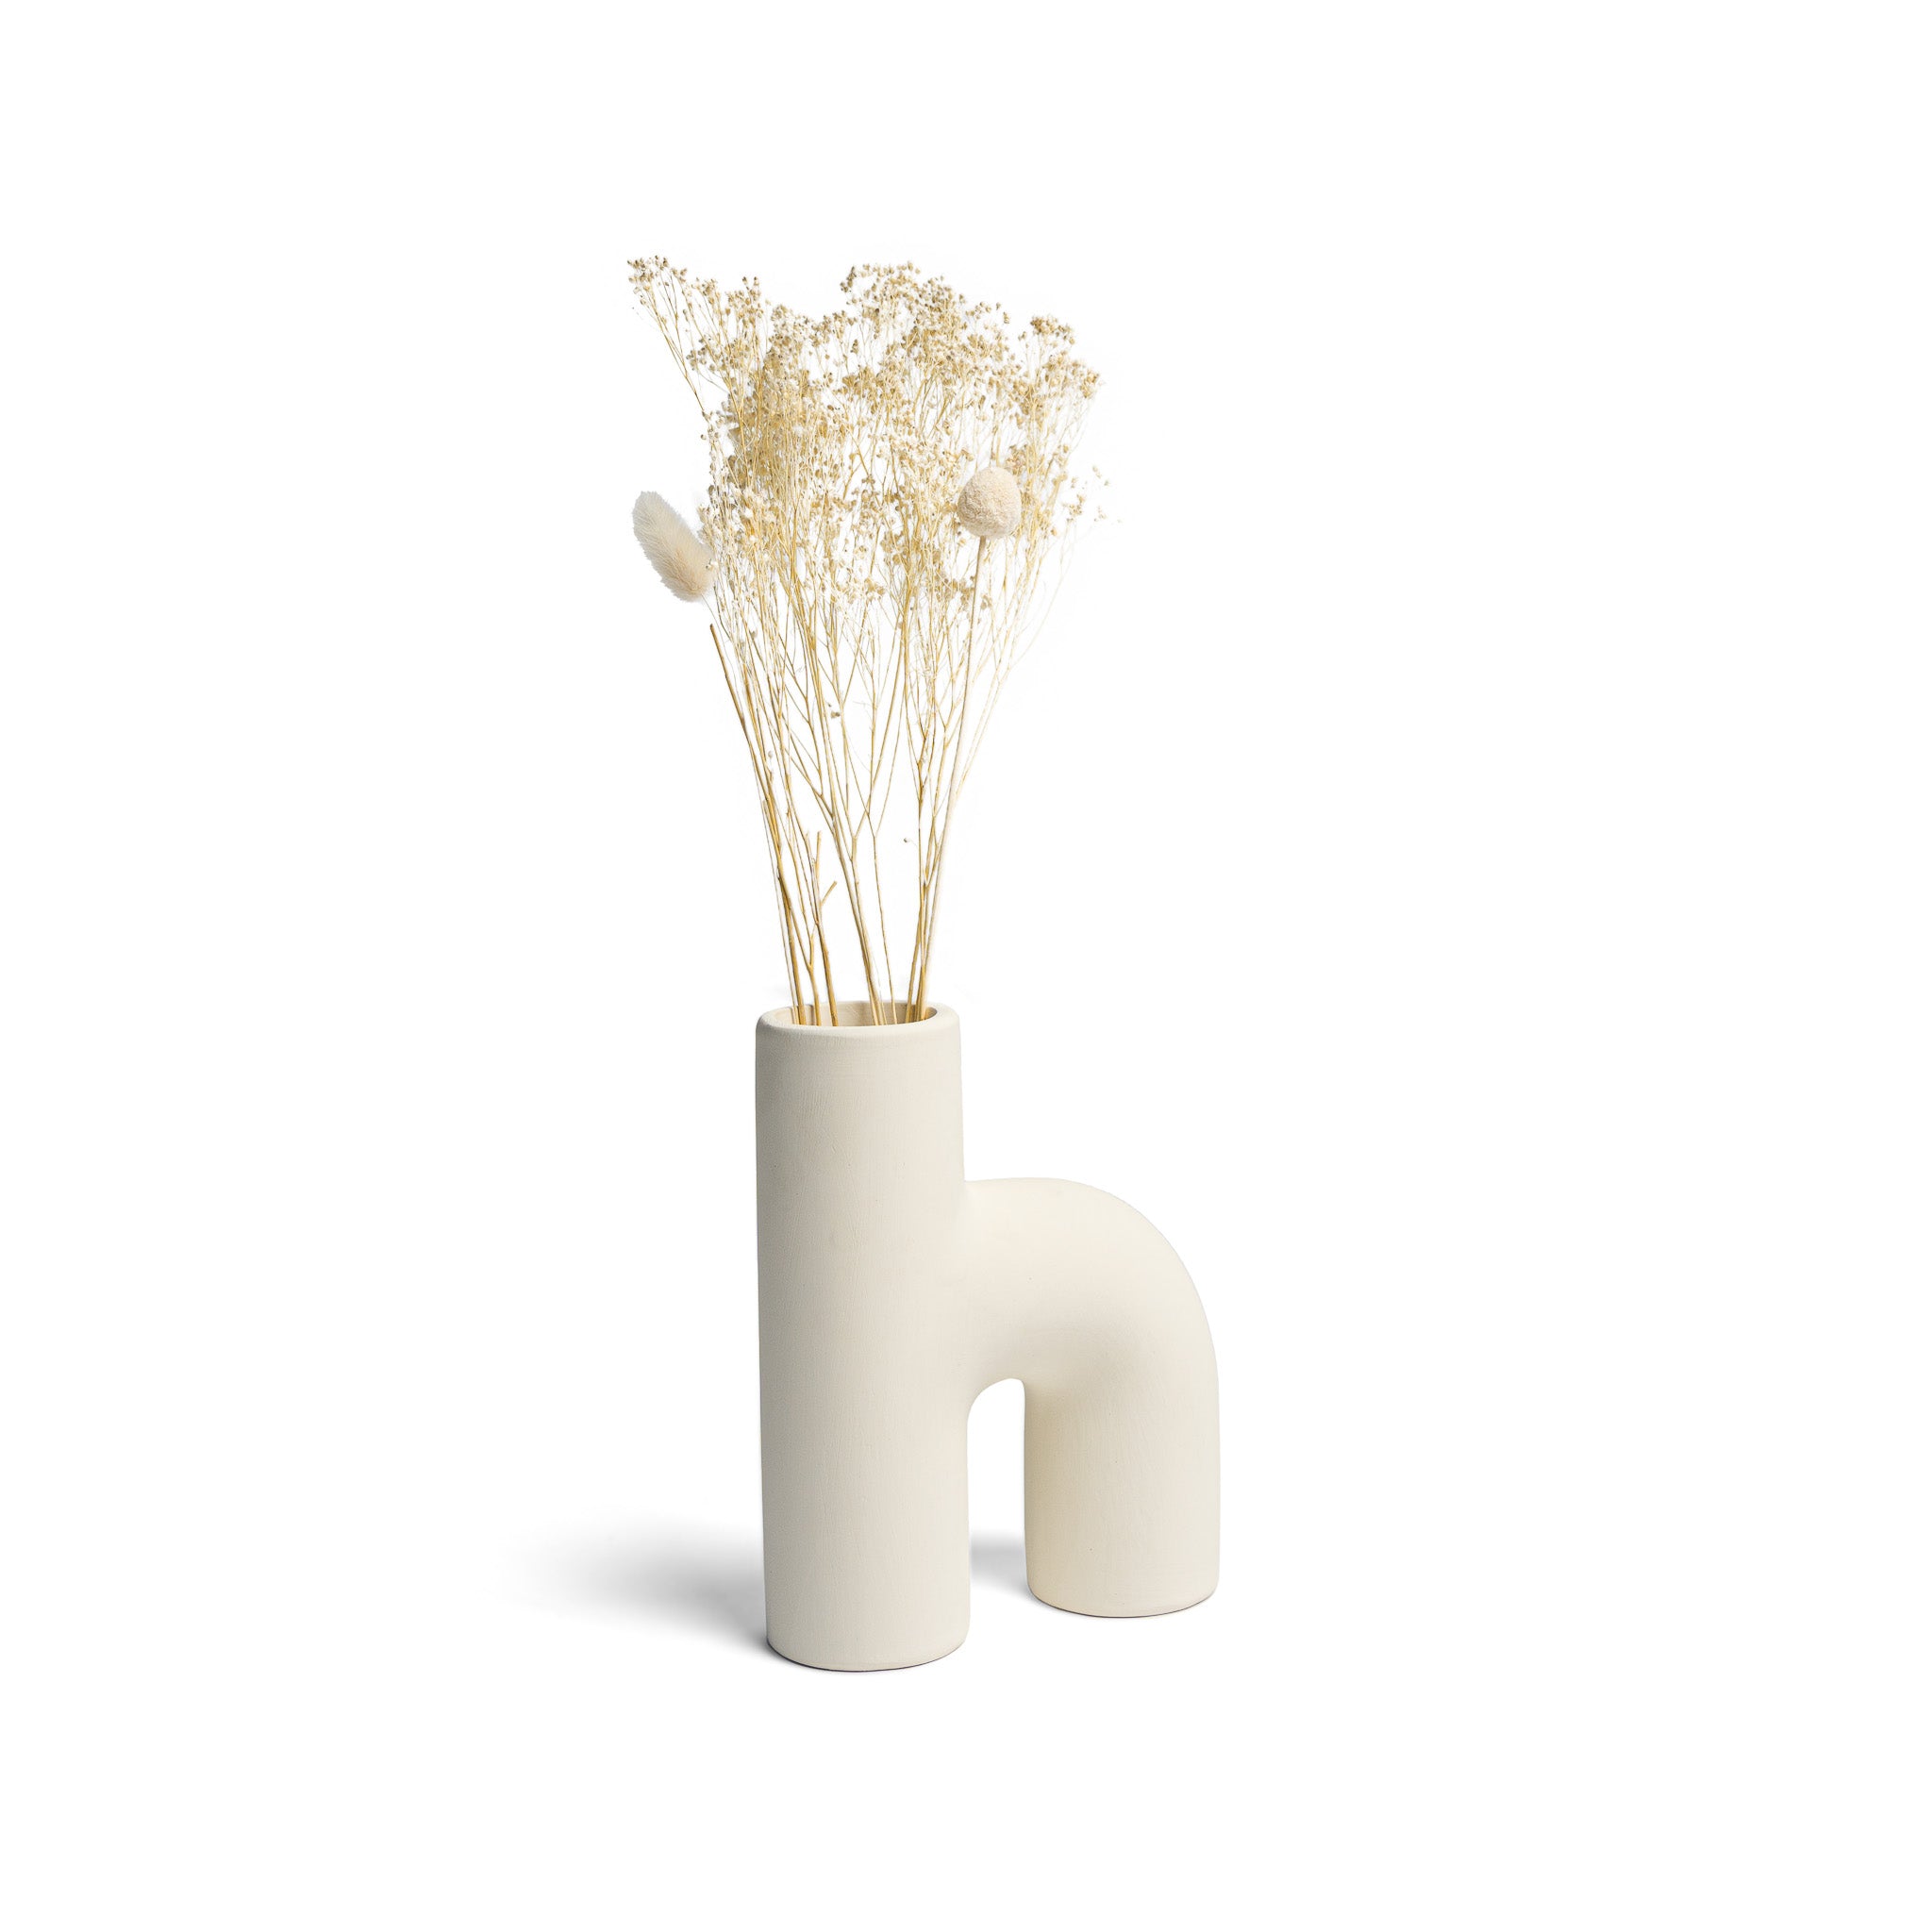 Lila Abstract Sculptural Decorative Modern Vase in White in Decorative by Maven Lane